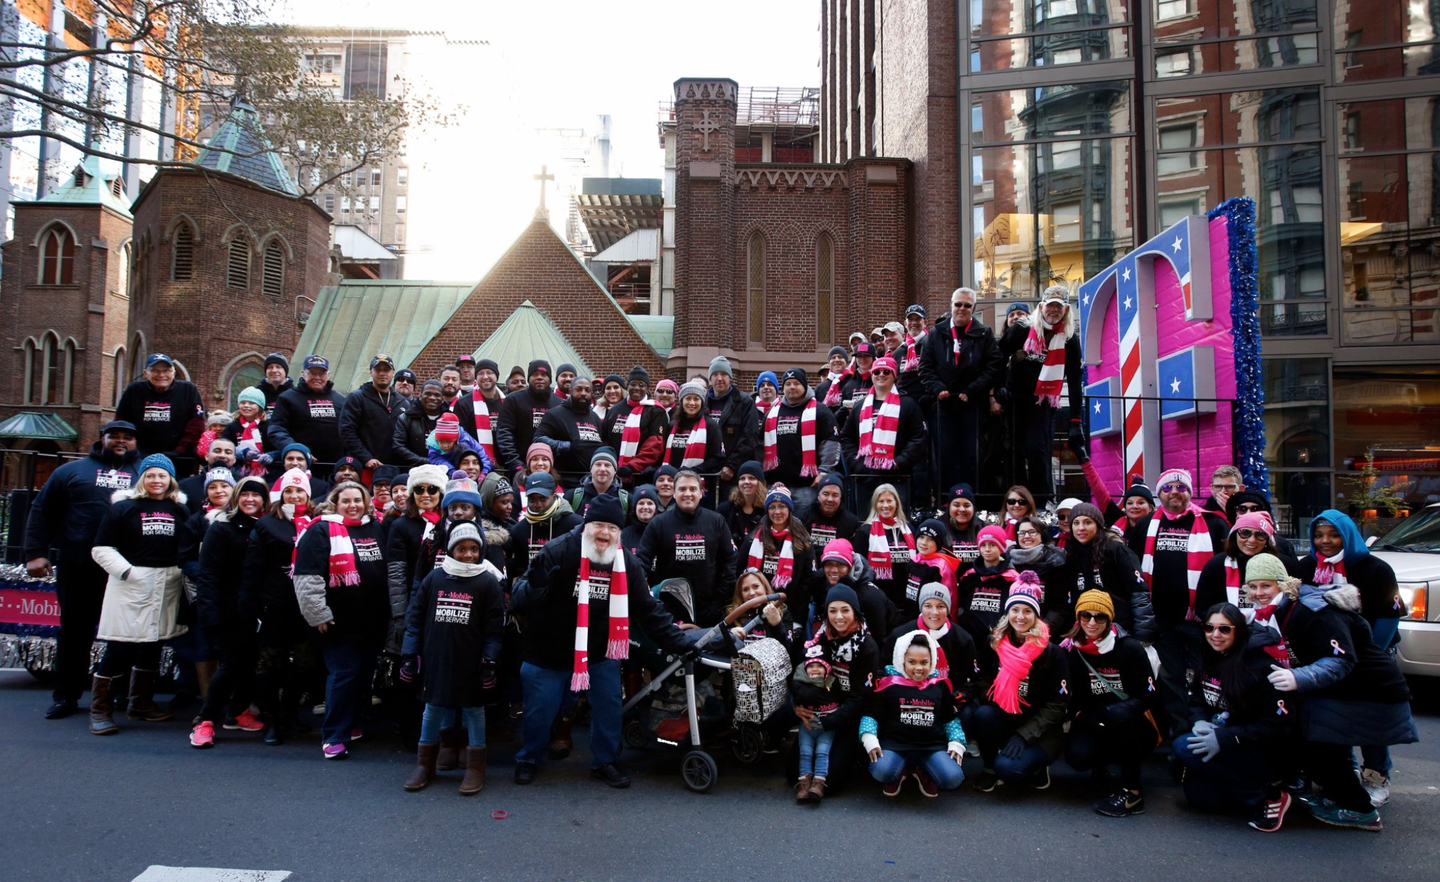 T-Mobile's veteran employees who participated in the 2017 NYC Veterans Day Parade